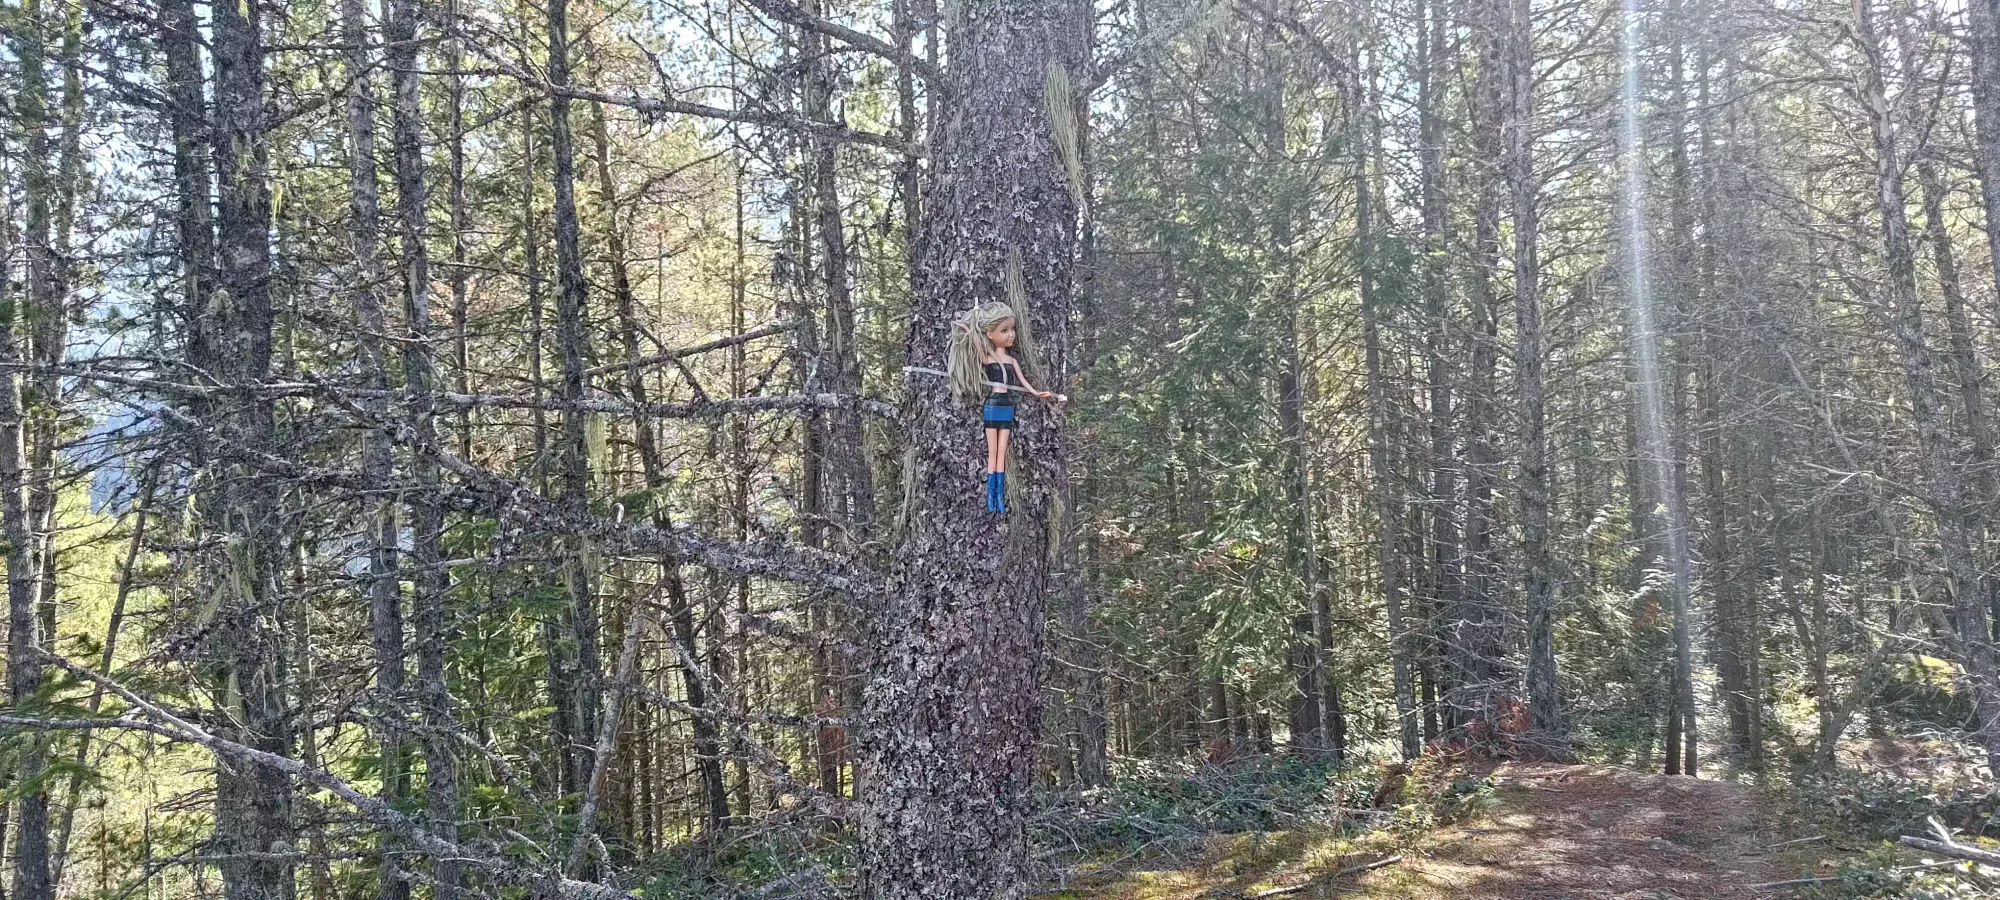 Barbie Doll on a tree in Squamish, BC